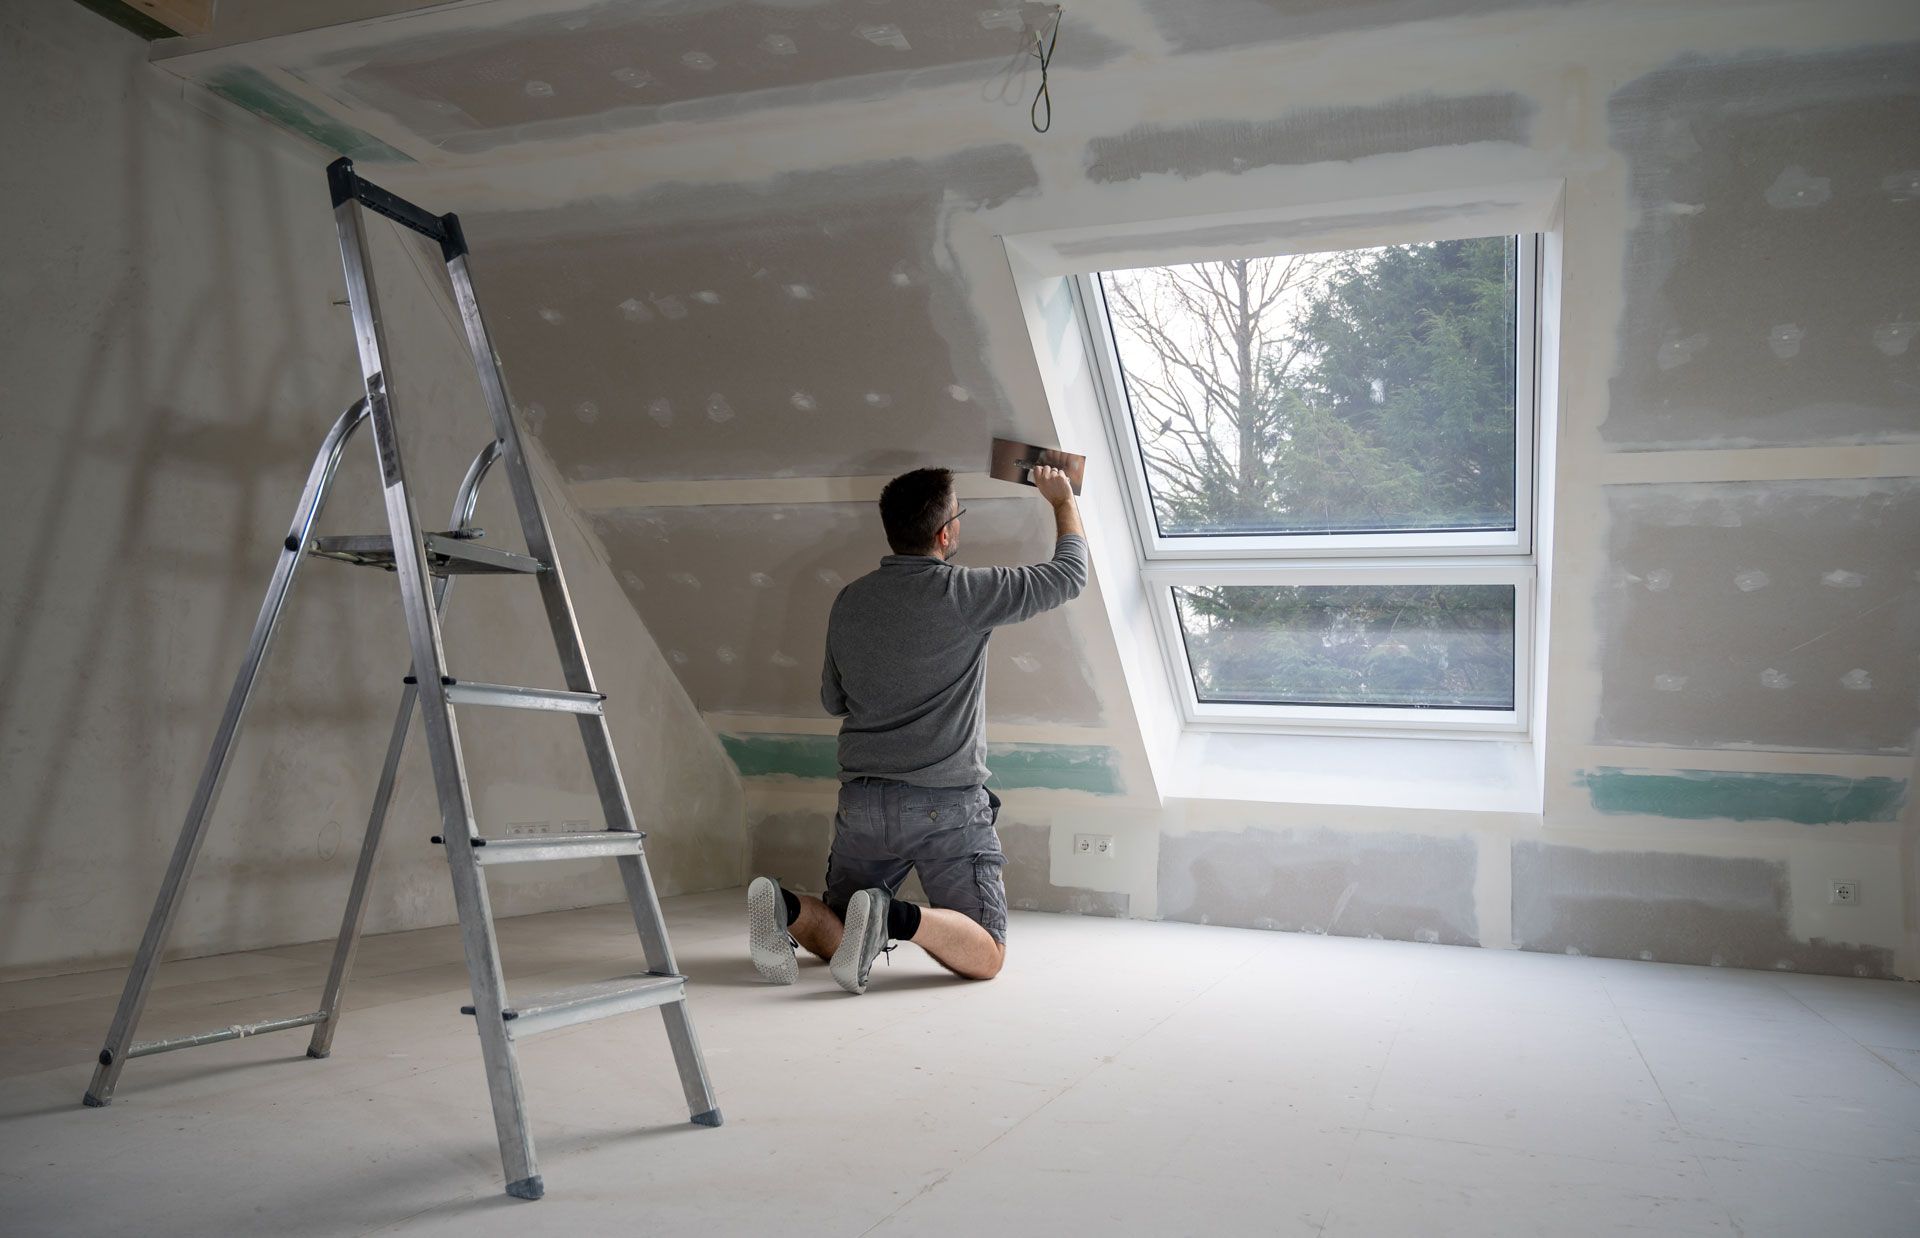 A man is kneeling down in front of a window in a room with a ladder.